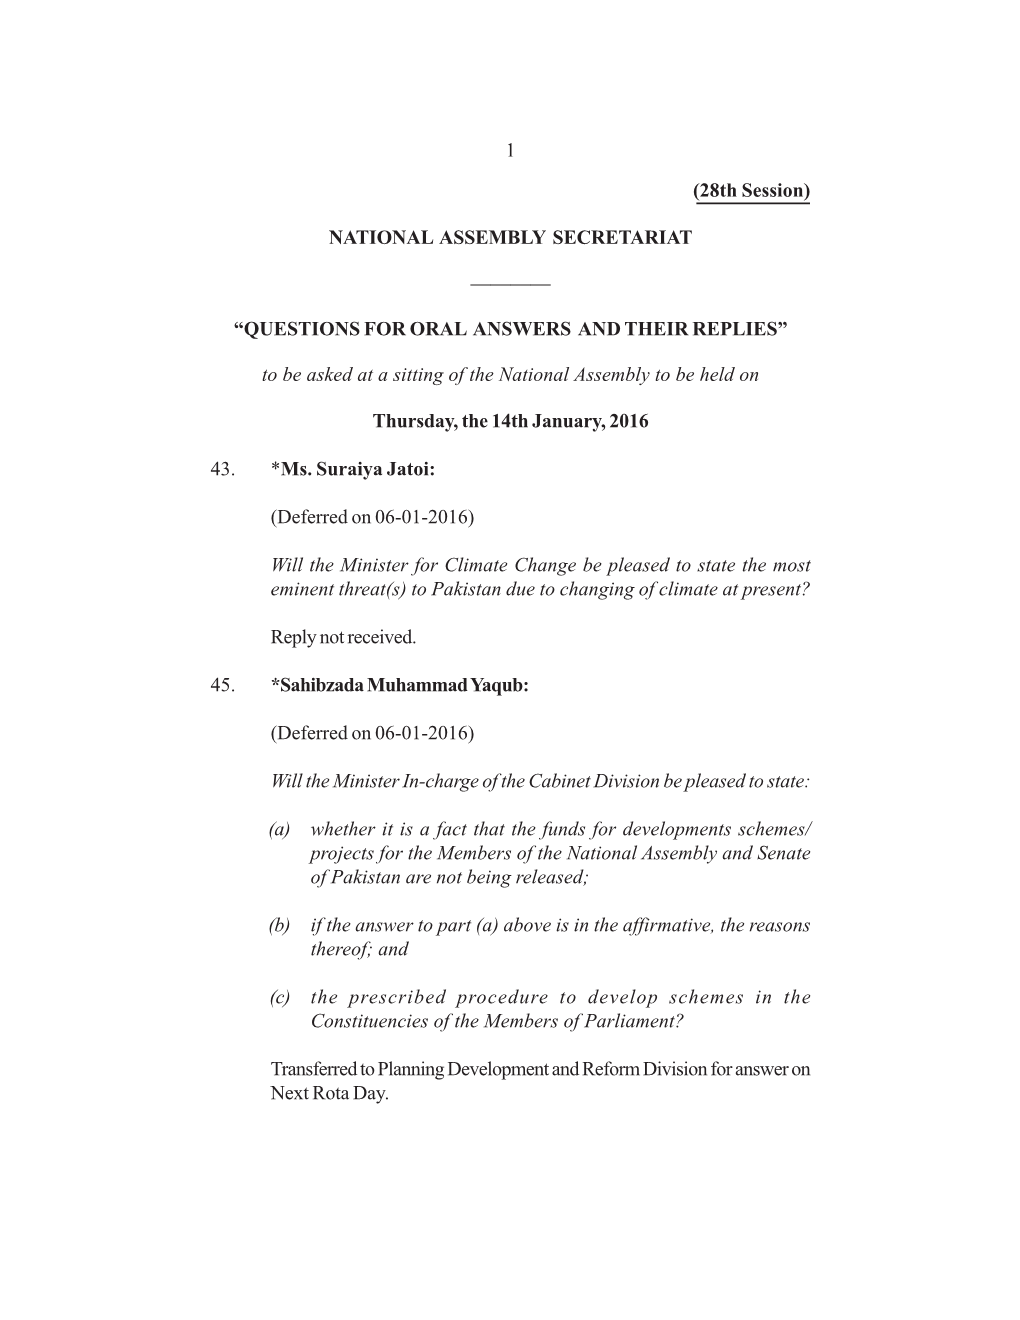 1 (28Th Session) NATIONAL ASSEMBLY SECRETARIAT ———— “QUESTIONS for ORAL ANSWERS and THEIR REPLIES” to Be Asked A